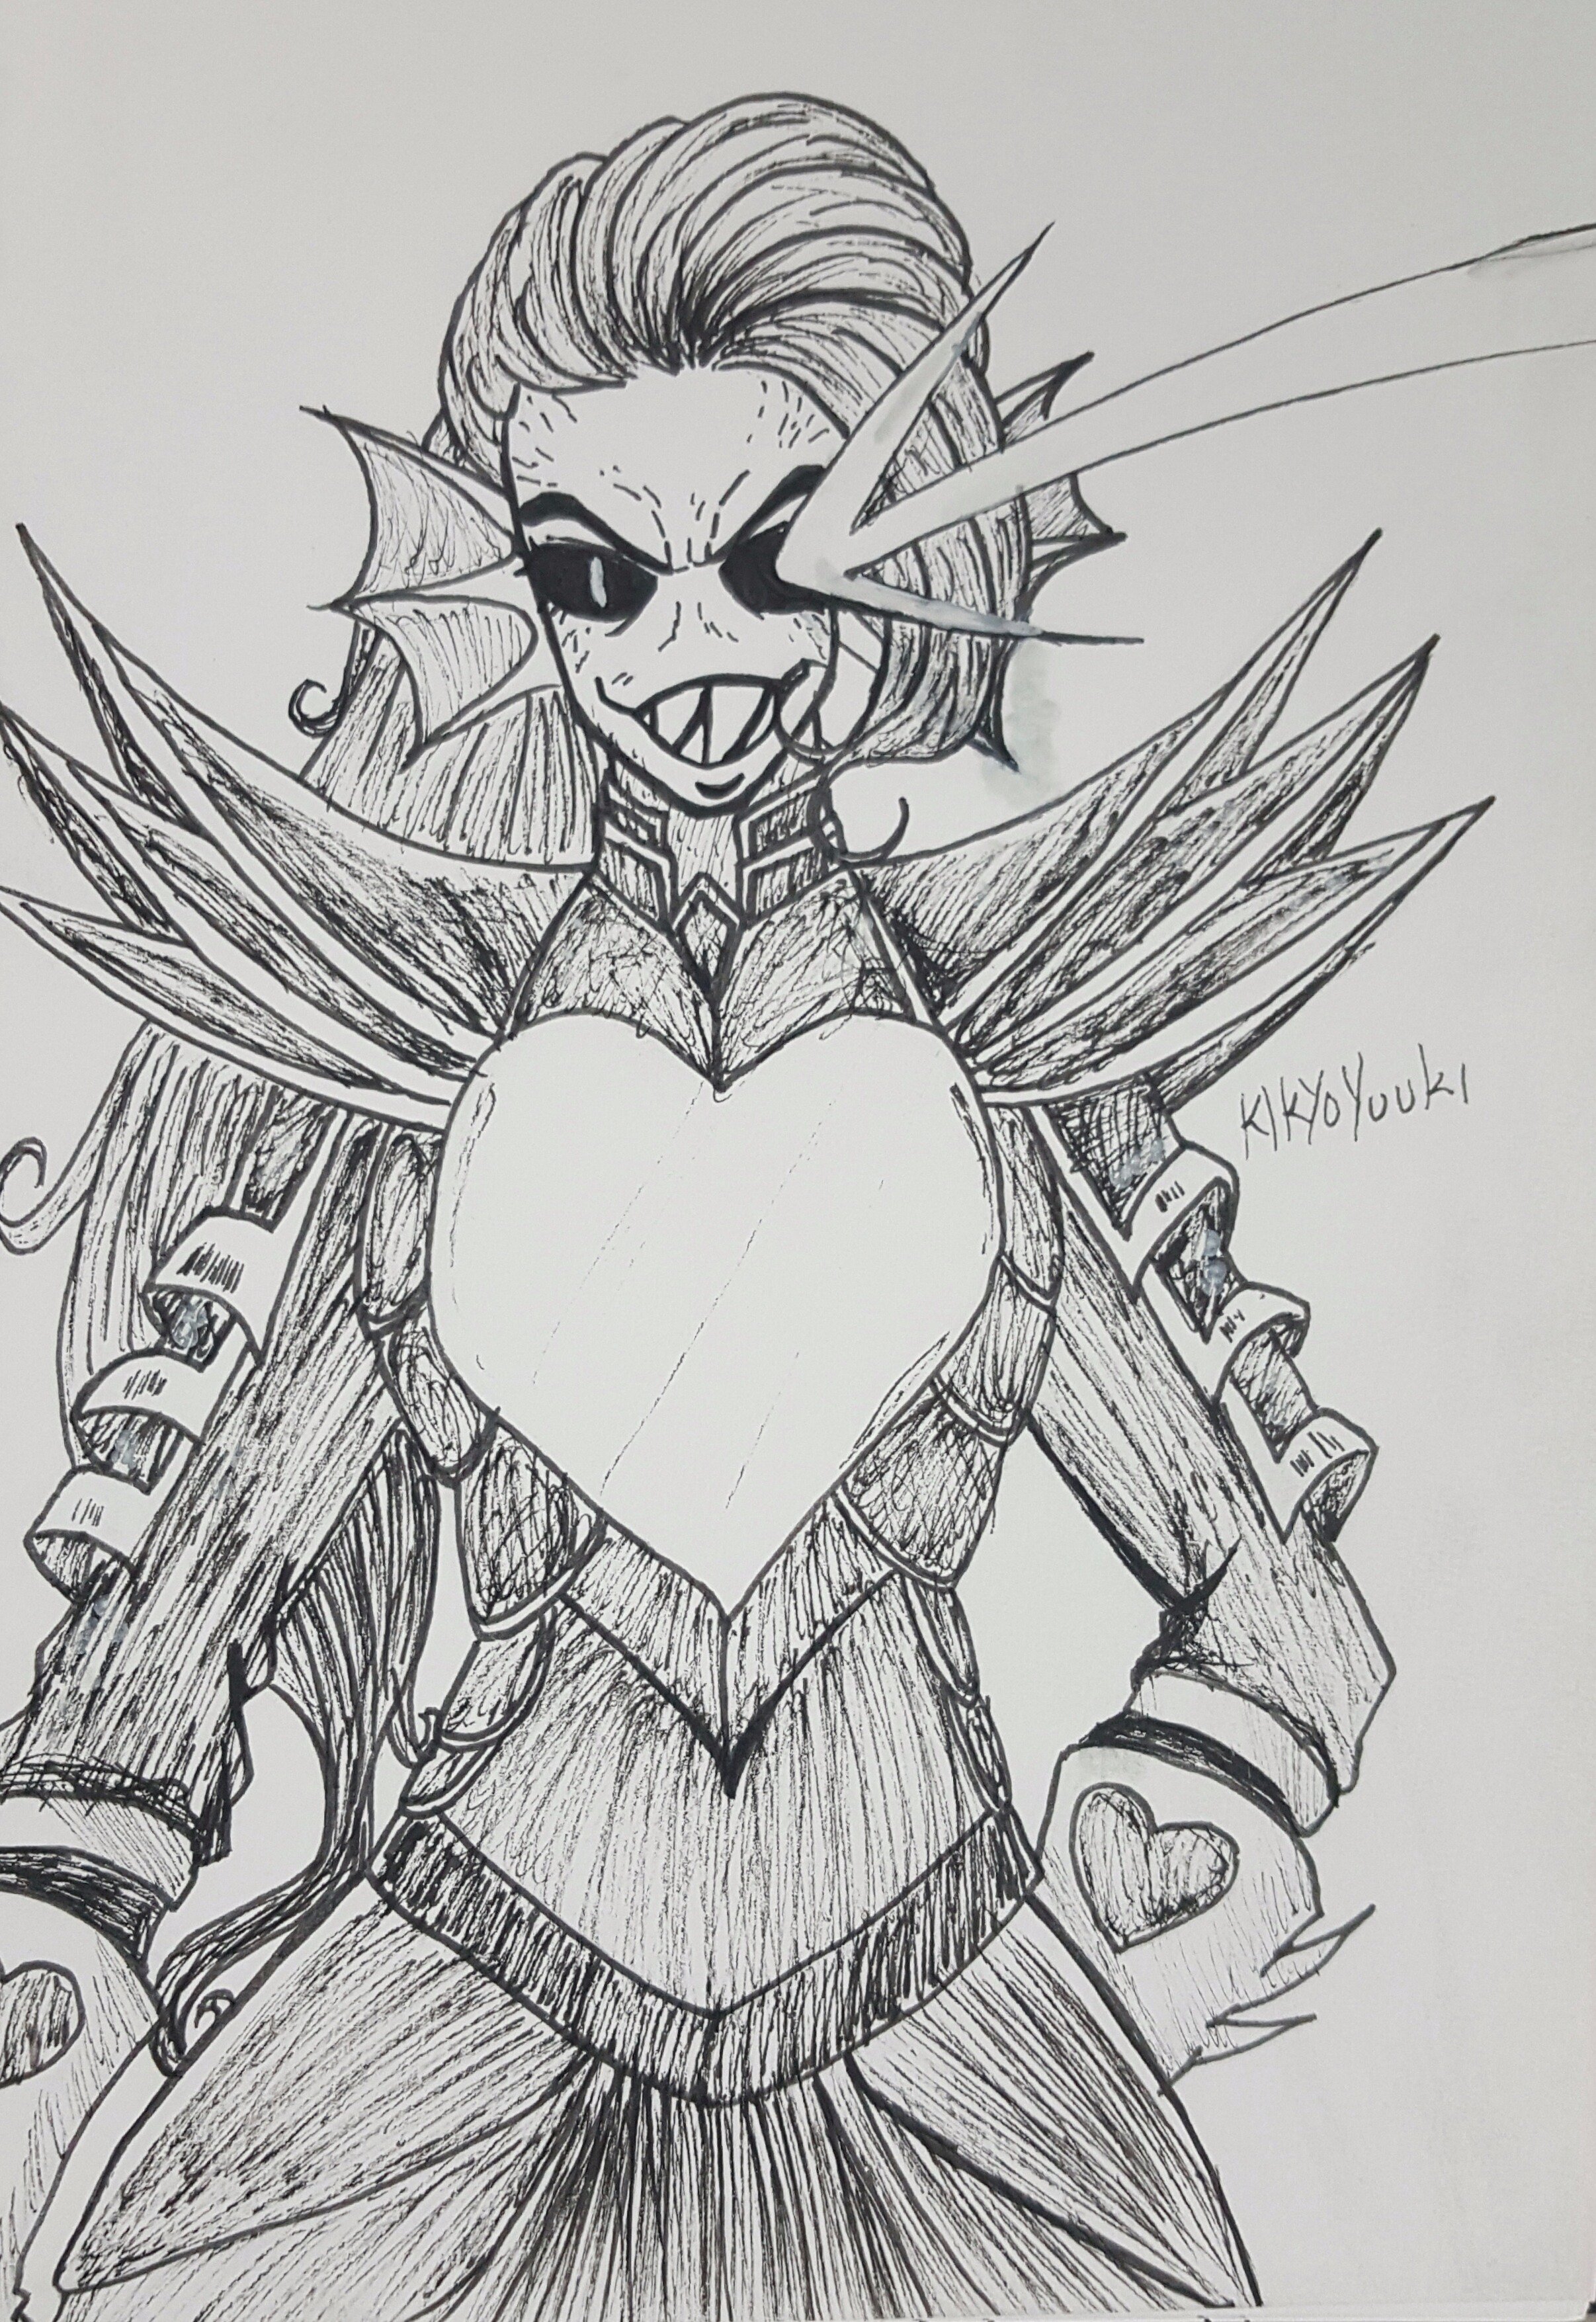 Kikyo Yuuki Art Commissions Open Undyne The Undying Should I Color It Or Is It Ok The Way It Is Undertale Undynetheundying Undyne Fanart Traditional T Co Zbtkph3wvq Twitter